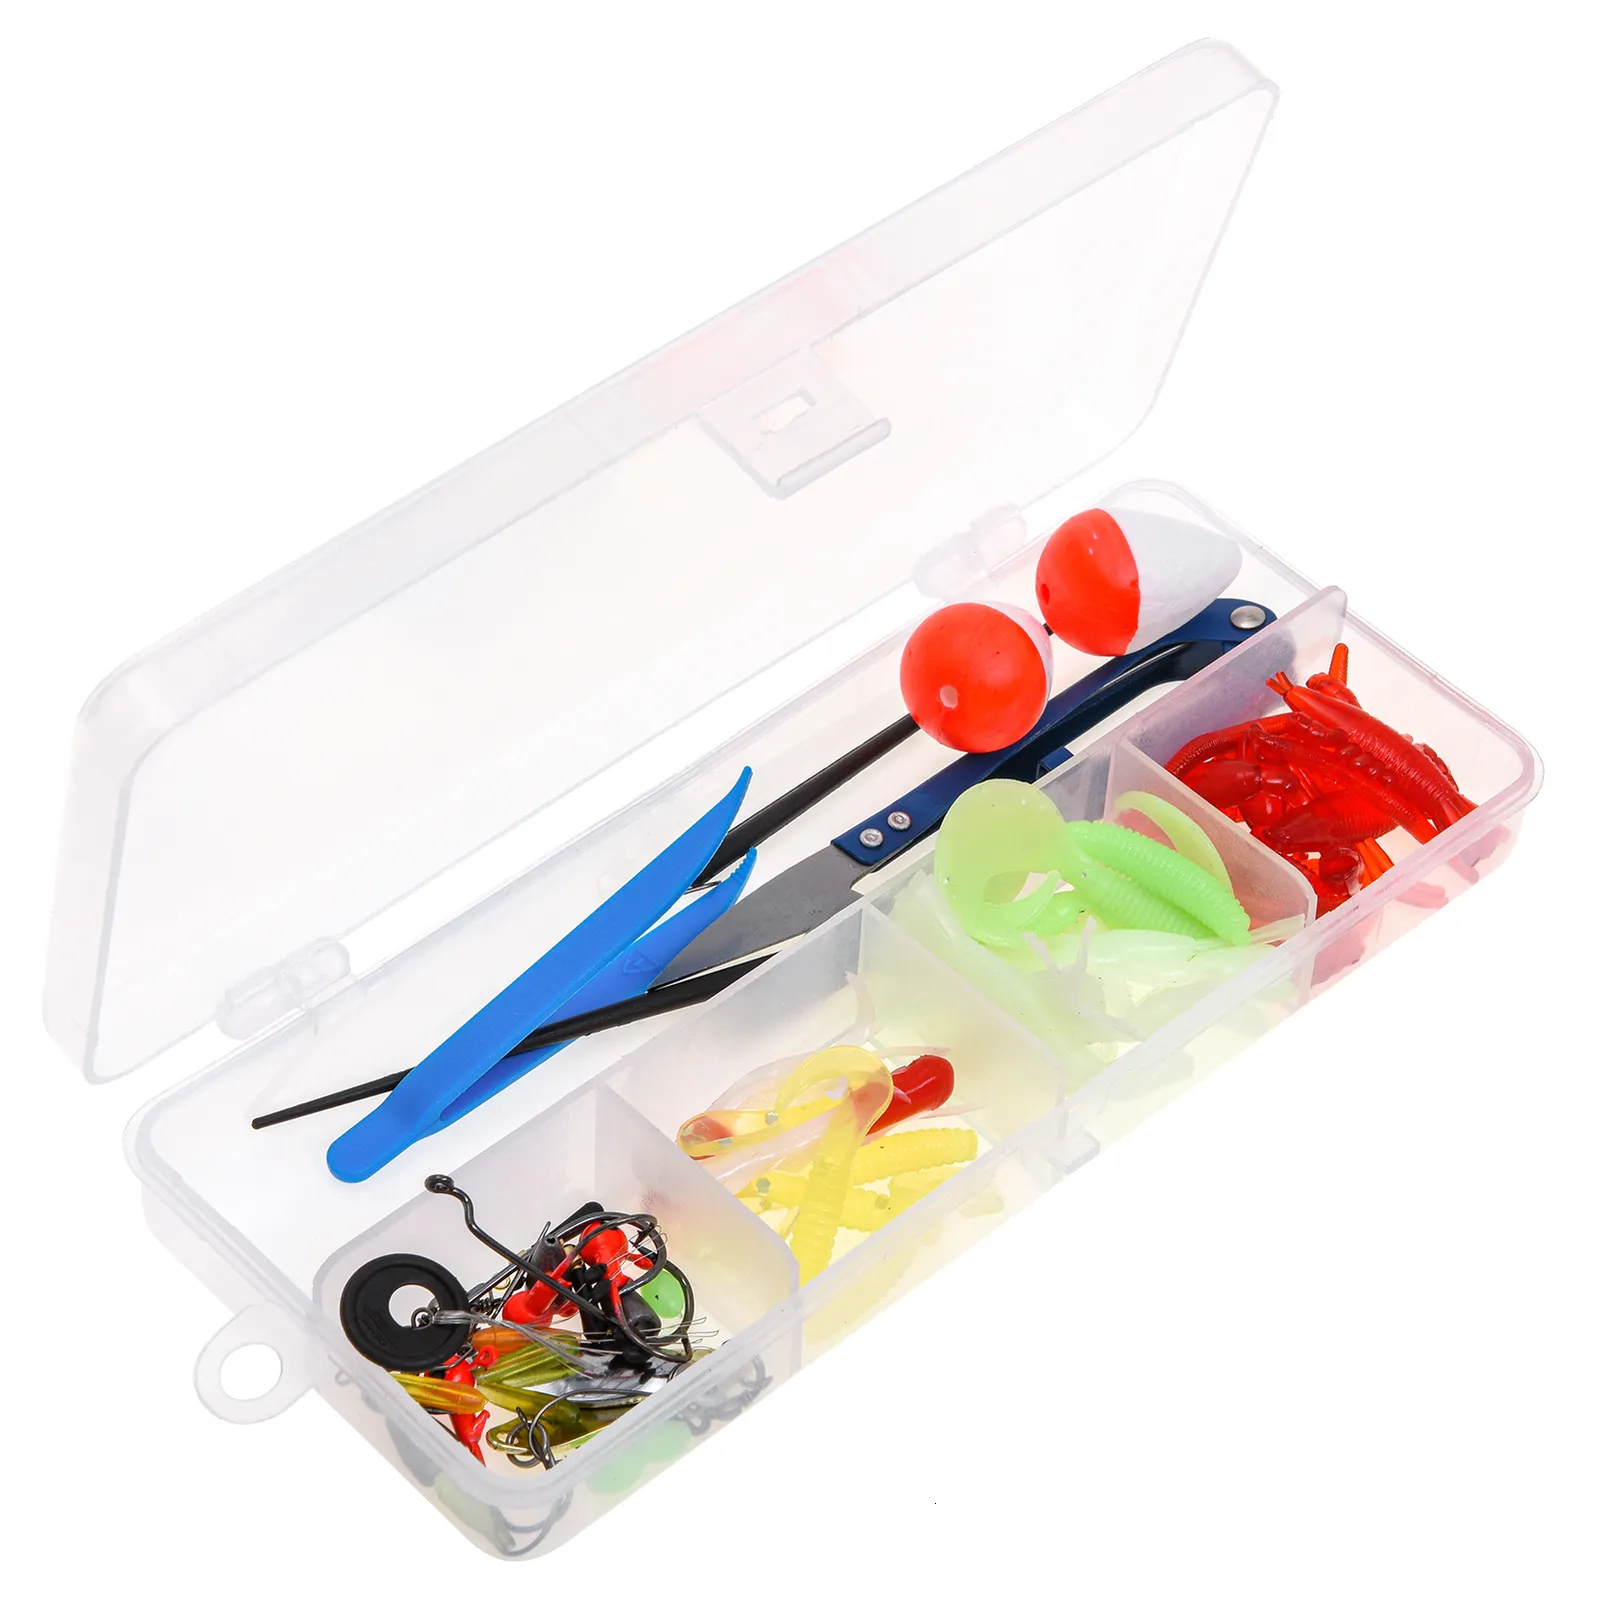 Lixada Ice Fishing Complete Kit With Ice Fishing Combos, Skimmer Scoop,  Carry Bag, Lures, Hooks, Swivels, And Accessories 230809 From Daye09,  $17.48